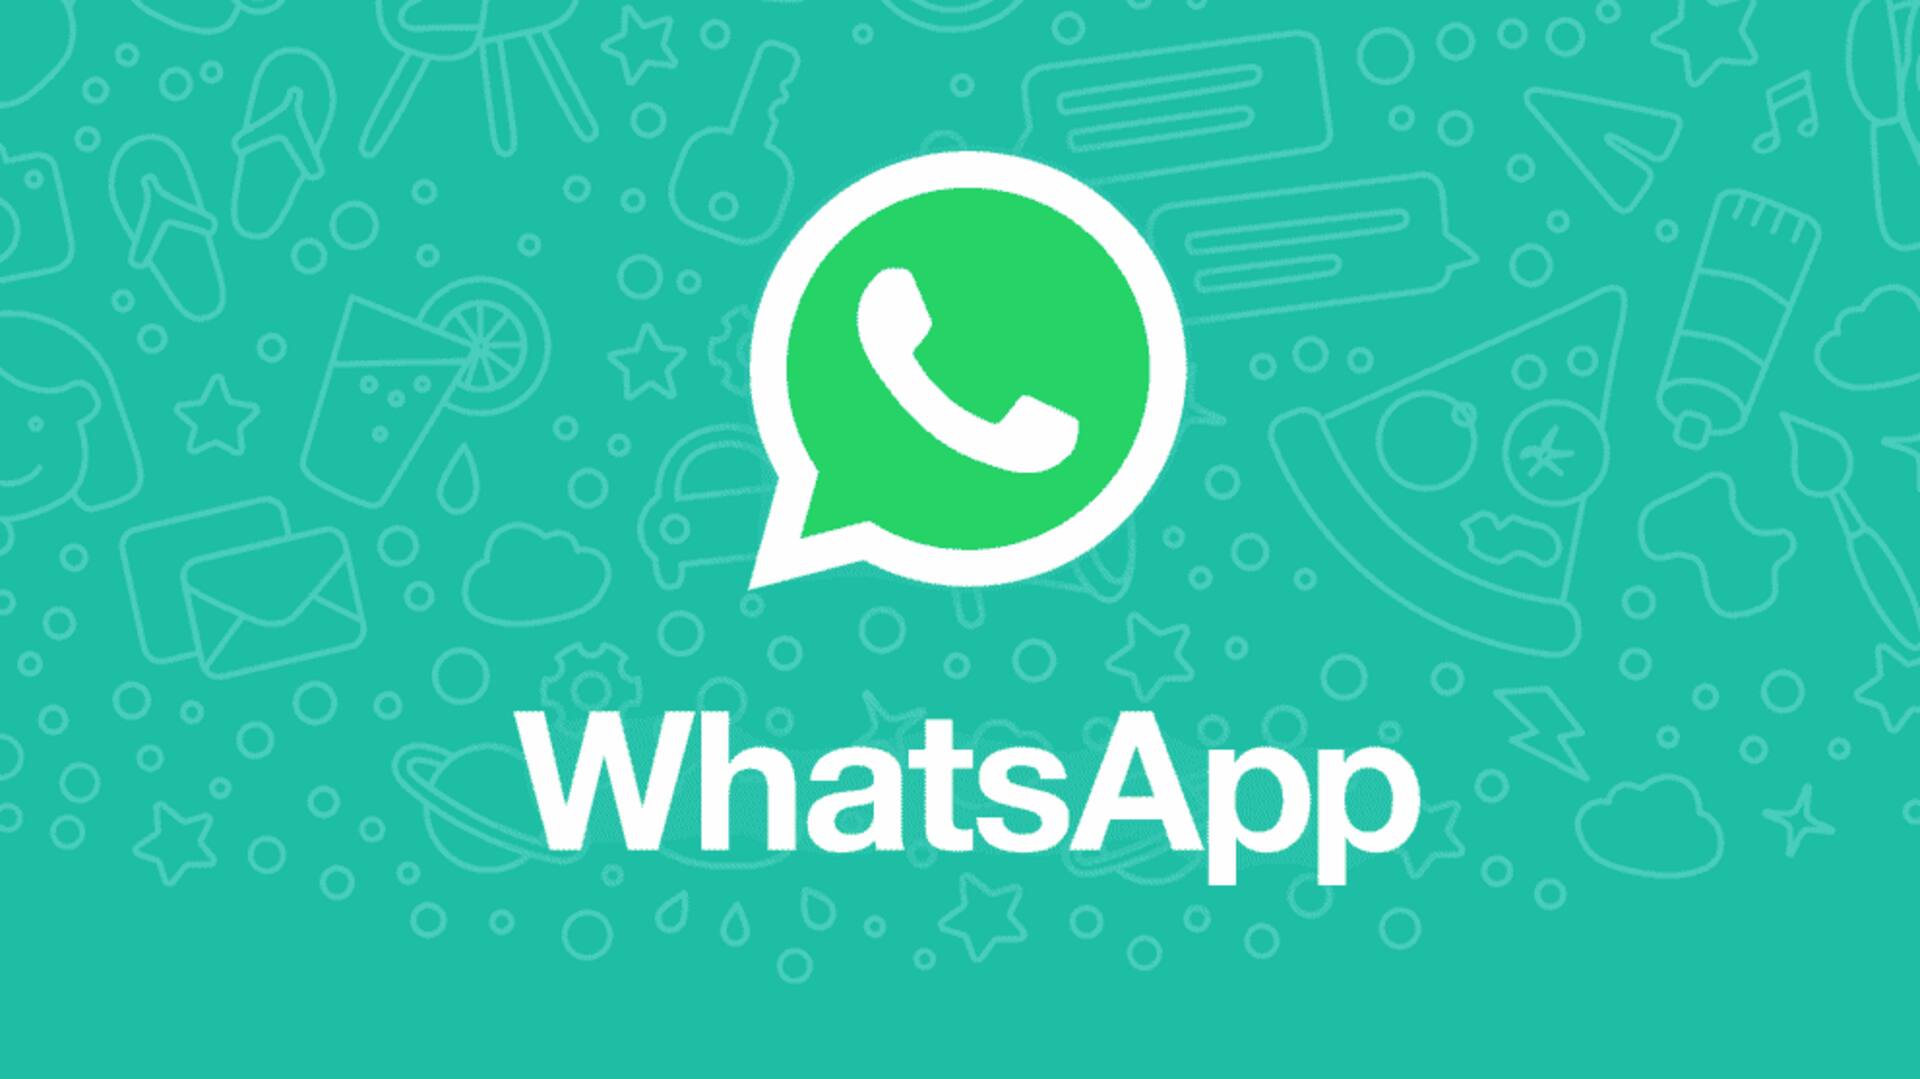 WhatsApp introduces new status updates filter feature: How it works